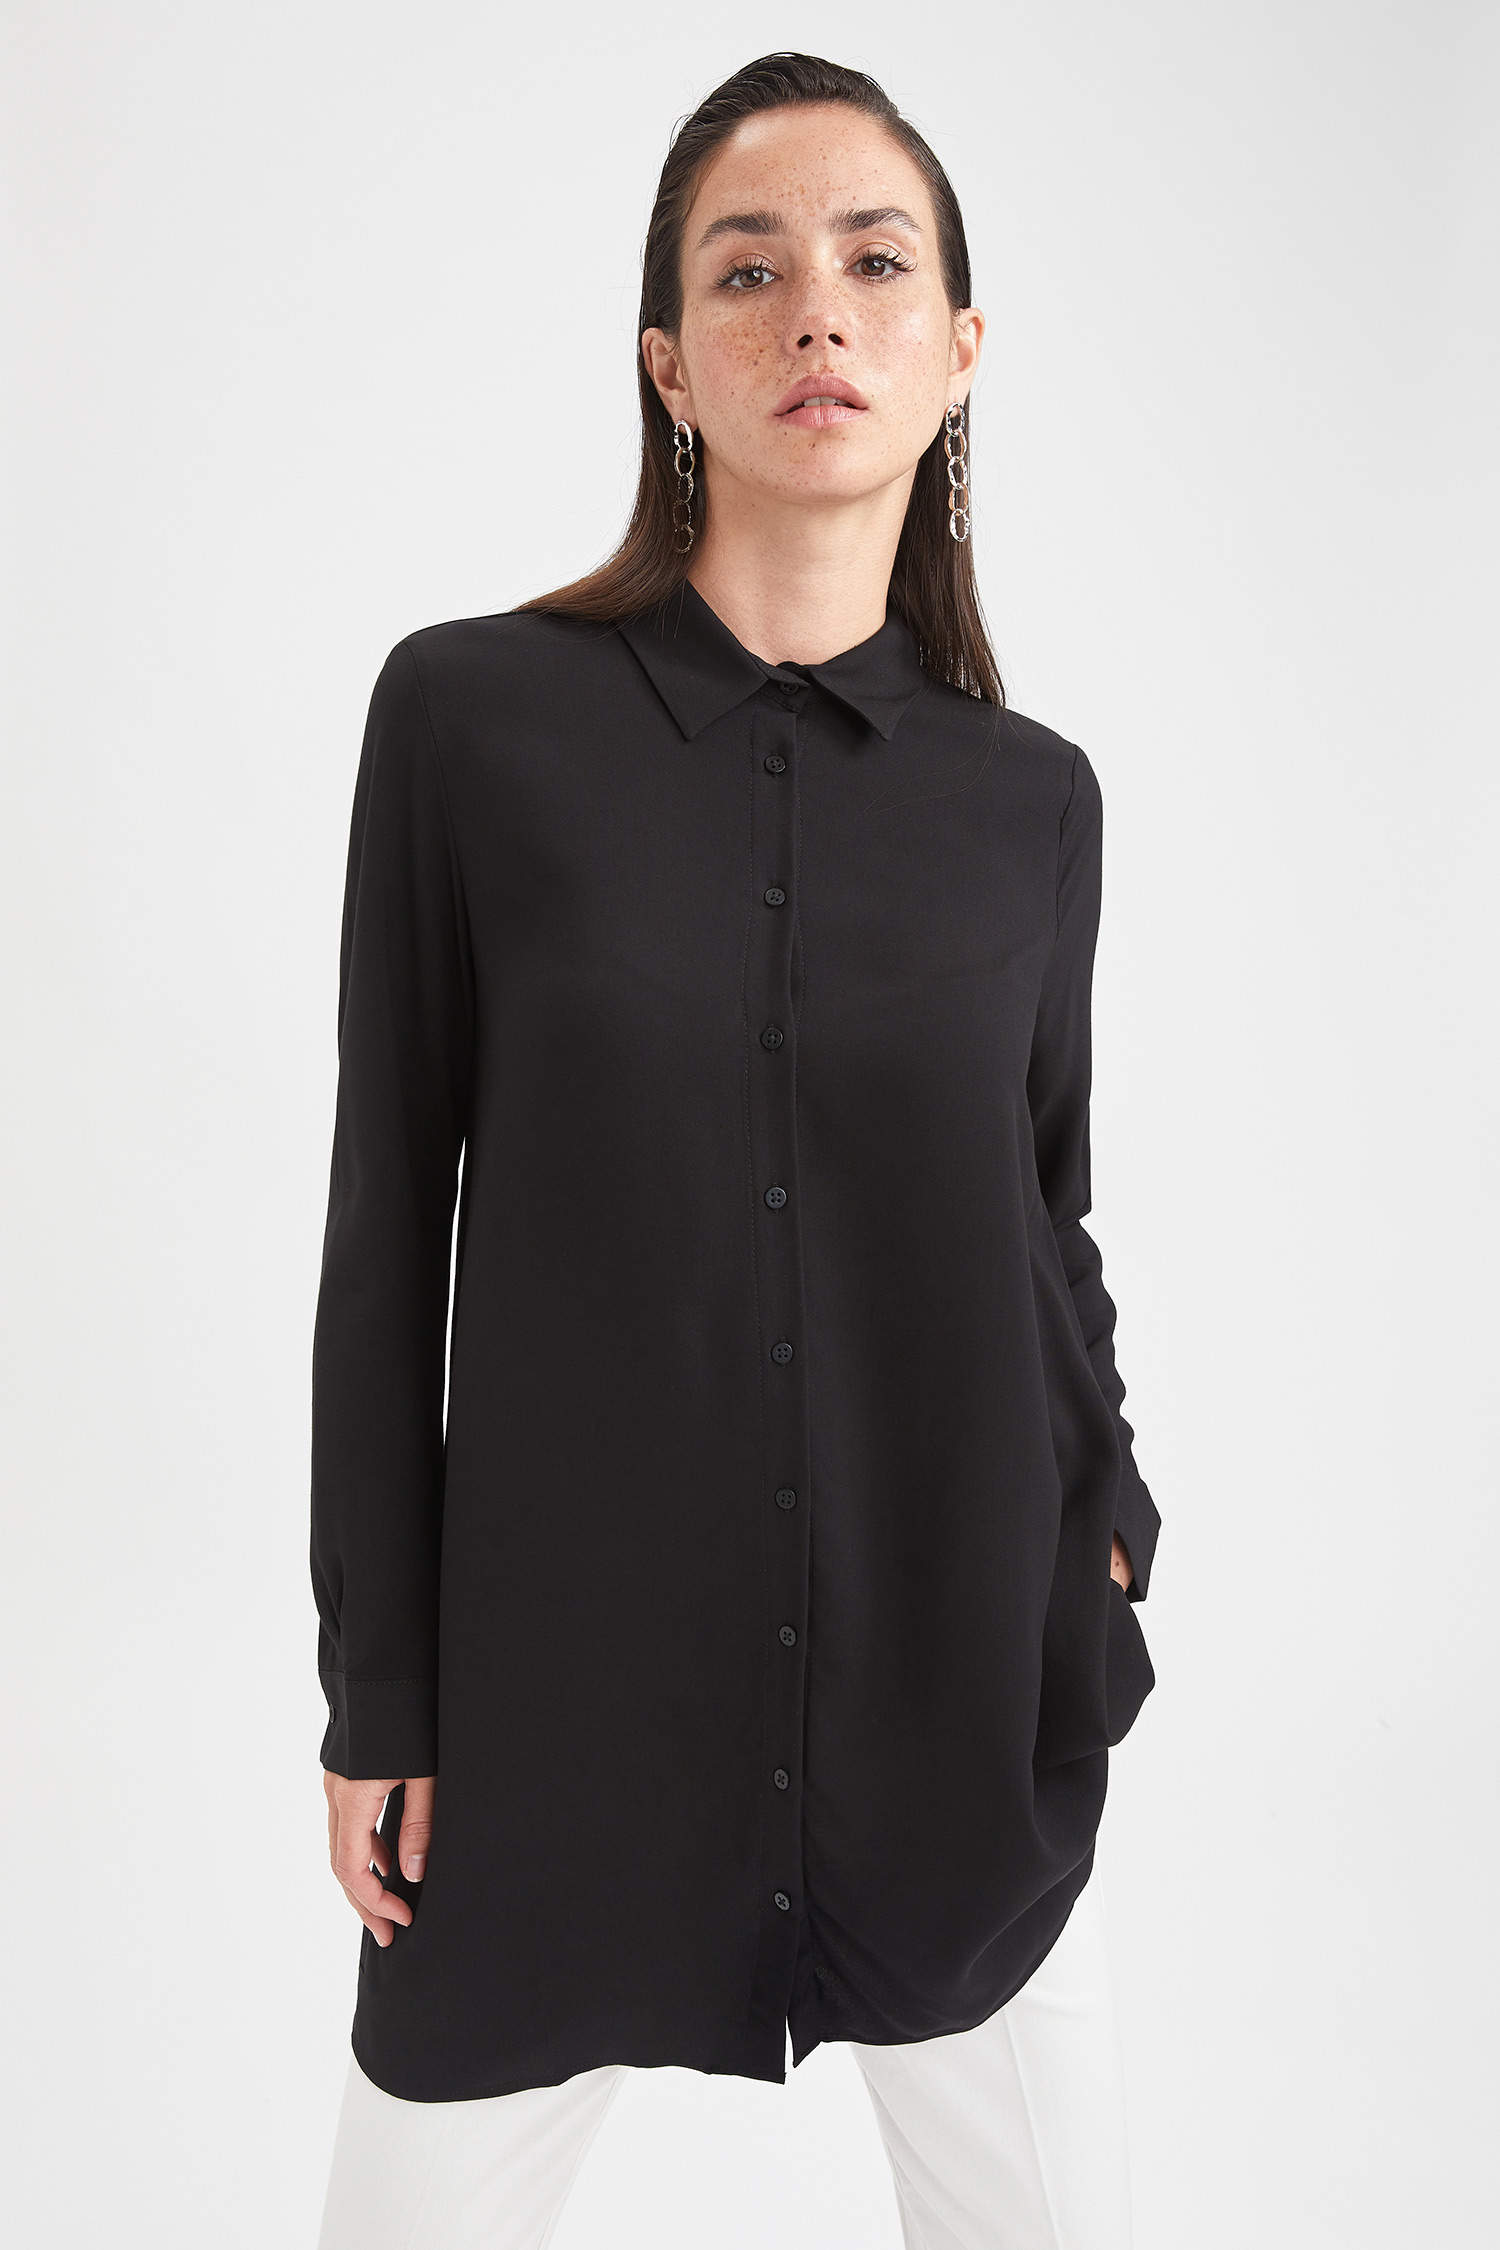 Black WOMAN Modest- Relaxed Fit Long Sleeve Tunic Shirt 2045594 | DeFacto